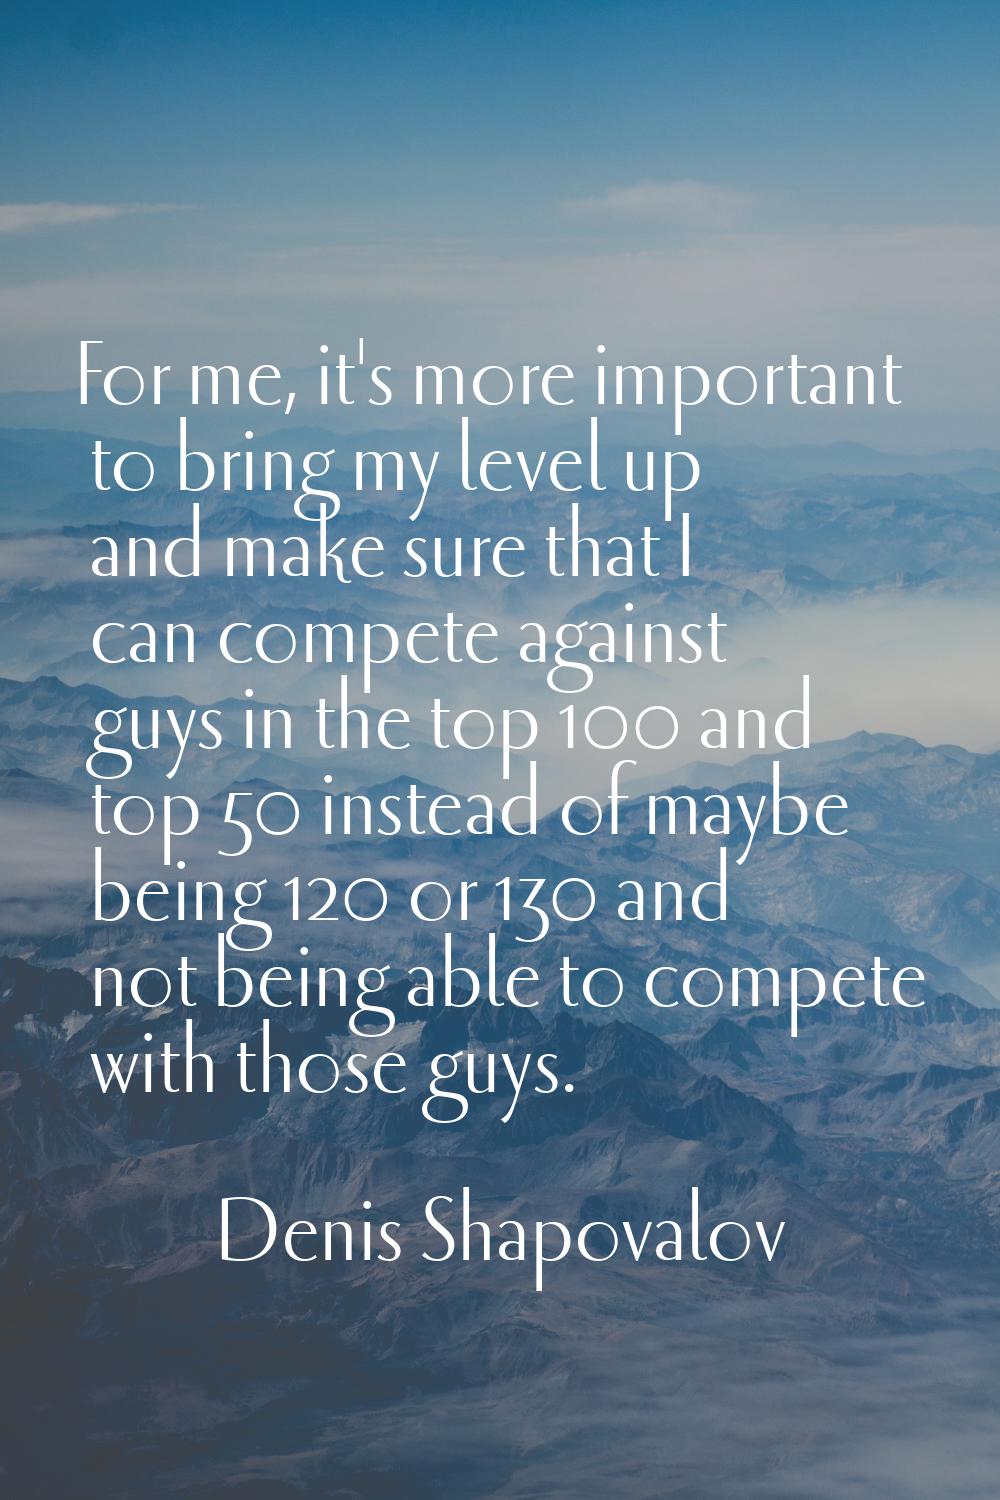 For me, it's more important to bring my level up and make sure that I can compete against guys in t